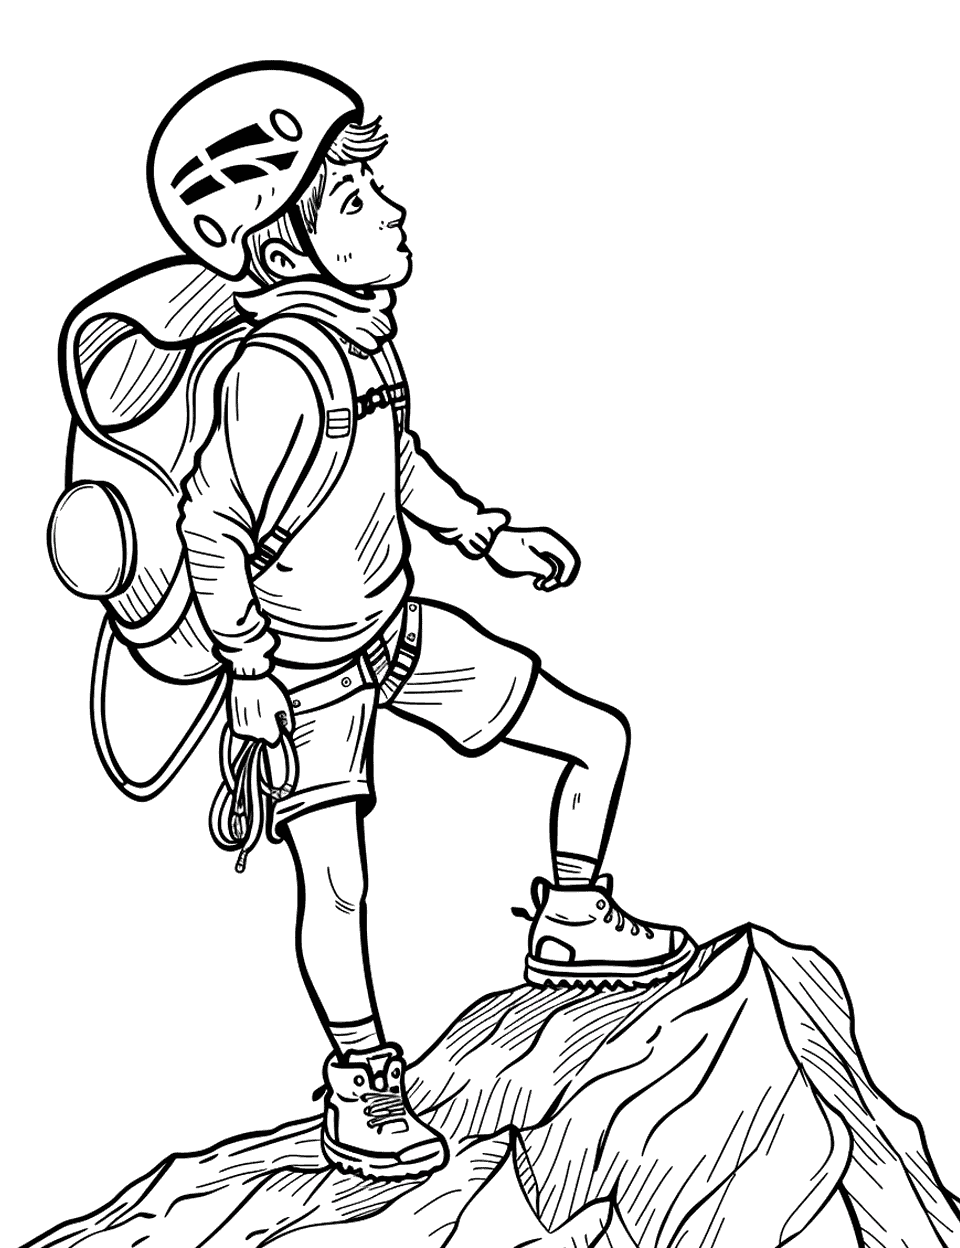 Mountain Climbing Adventure Sports Coloring Page - A climber reaching the top of a small mountain, with safety gear on.